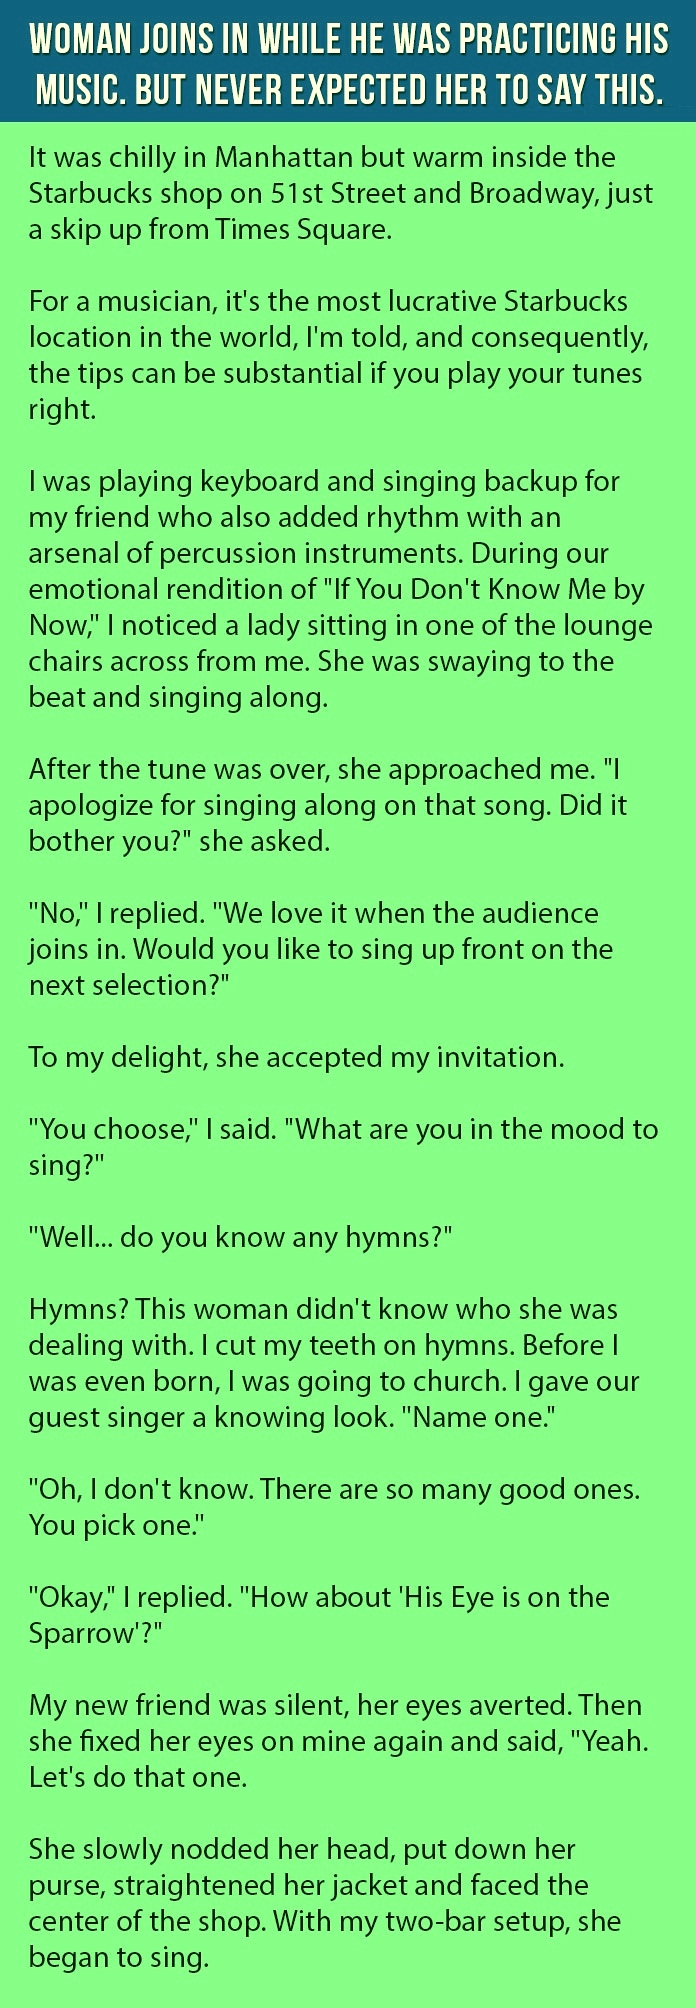 Women Joins A Musician When He Is Practicing 